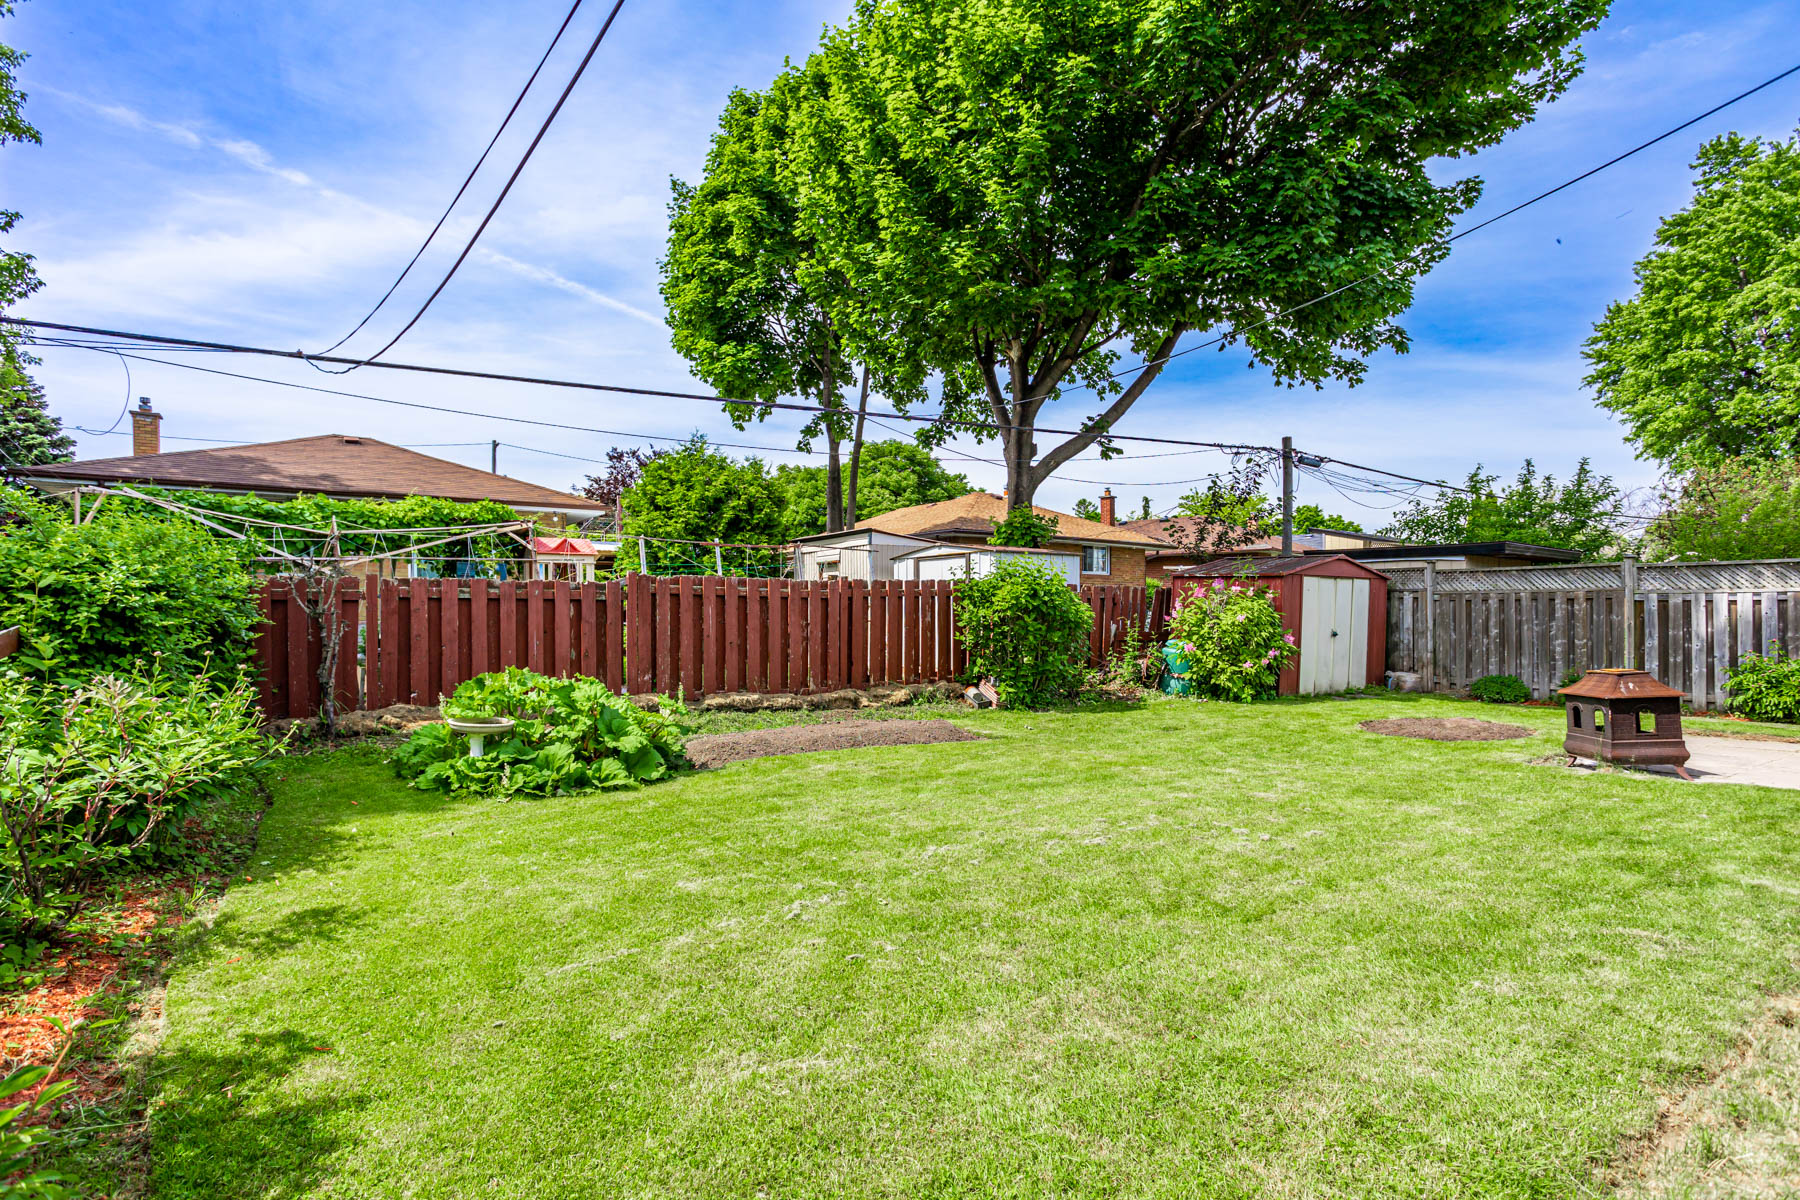 Huge backyard with trees, shrubs, fence, and garden shed – 36 Earlton Rd.